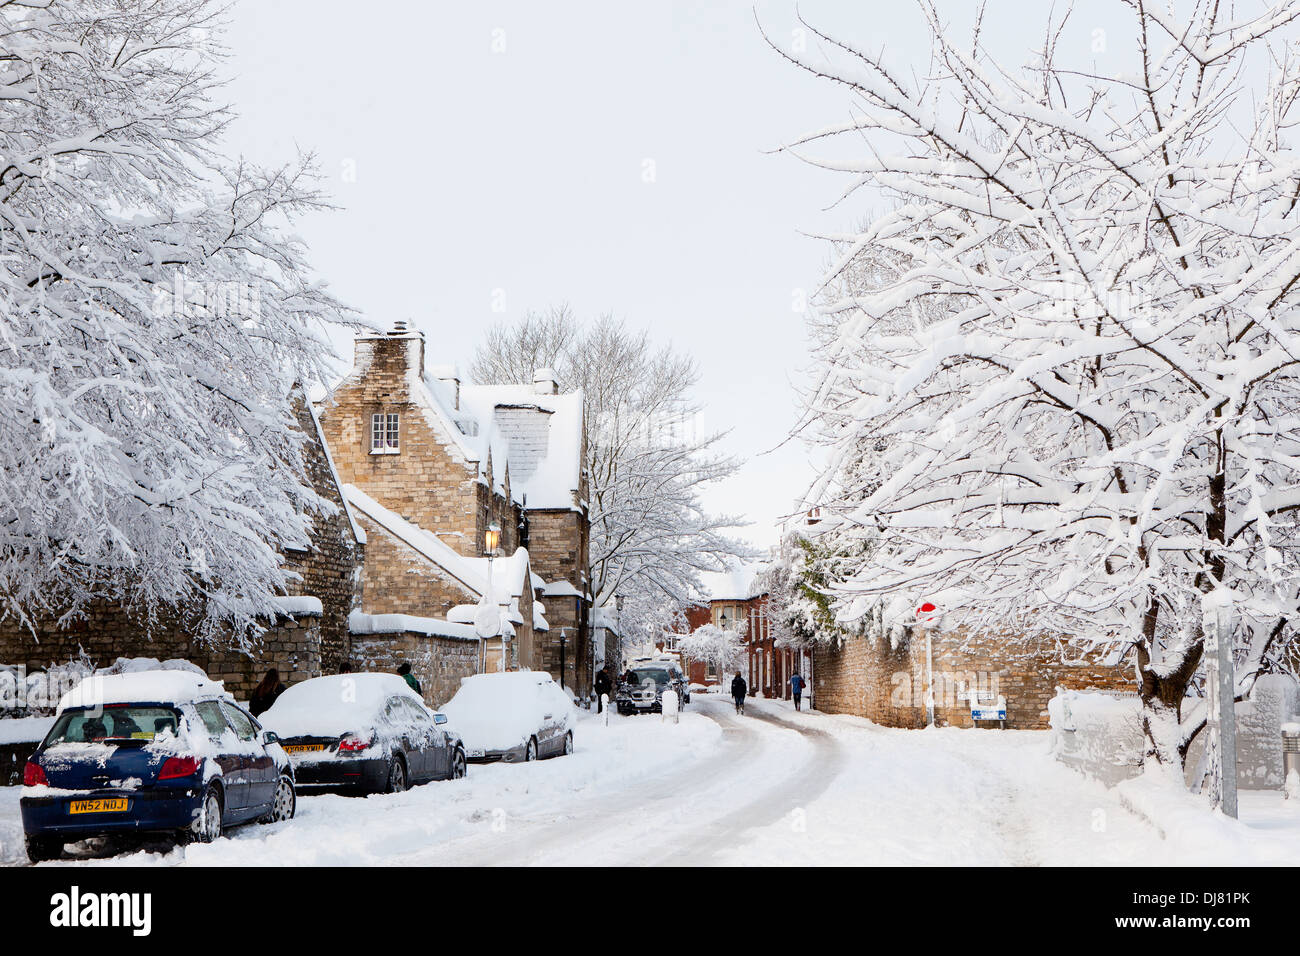 Eastgate in Lincoln, Lincolnshire covered in snow following a heavy snowfall Stock Photo